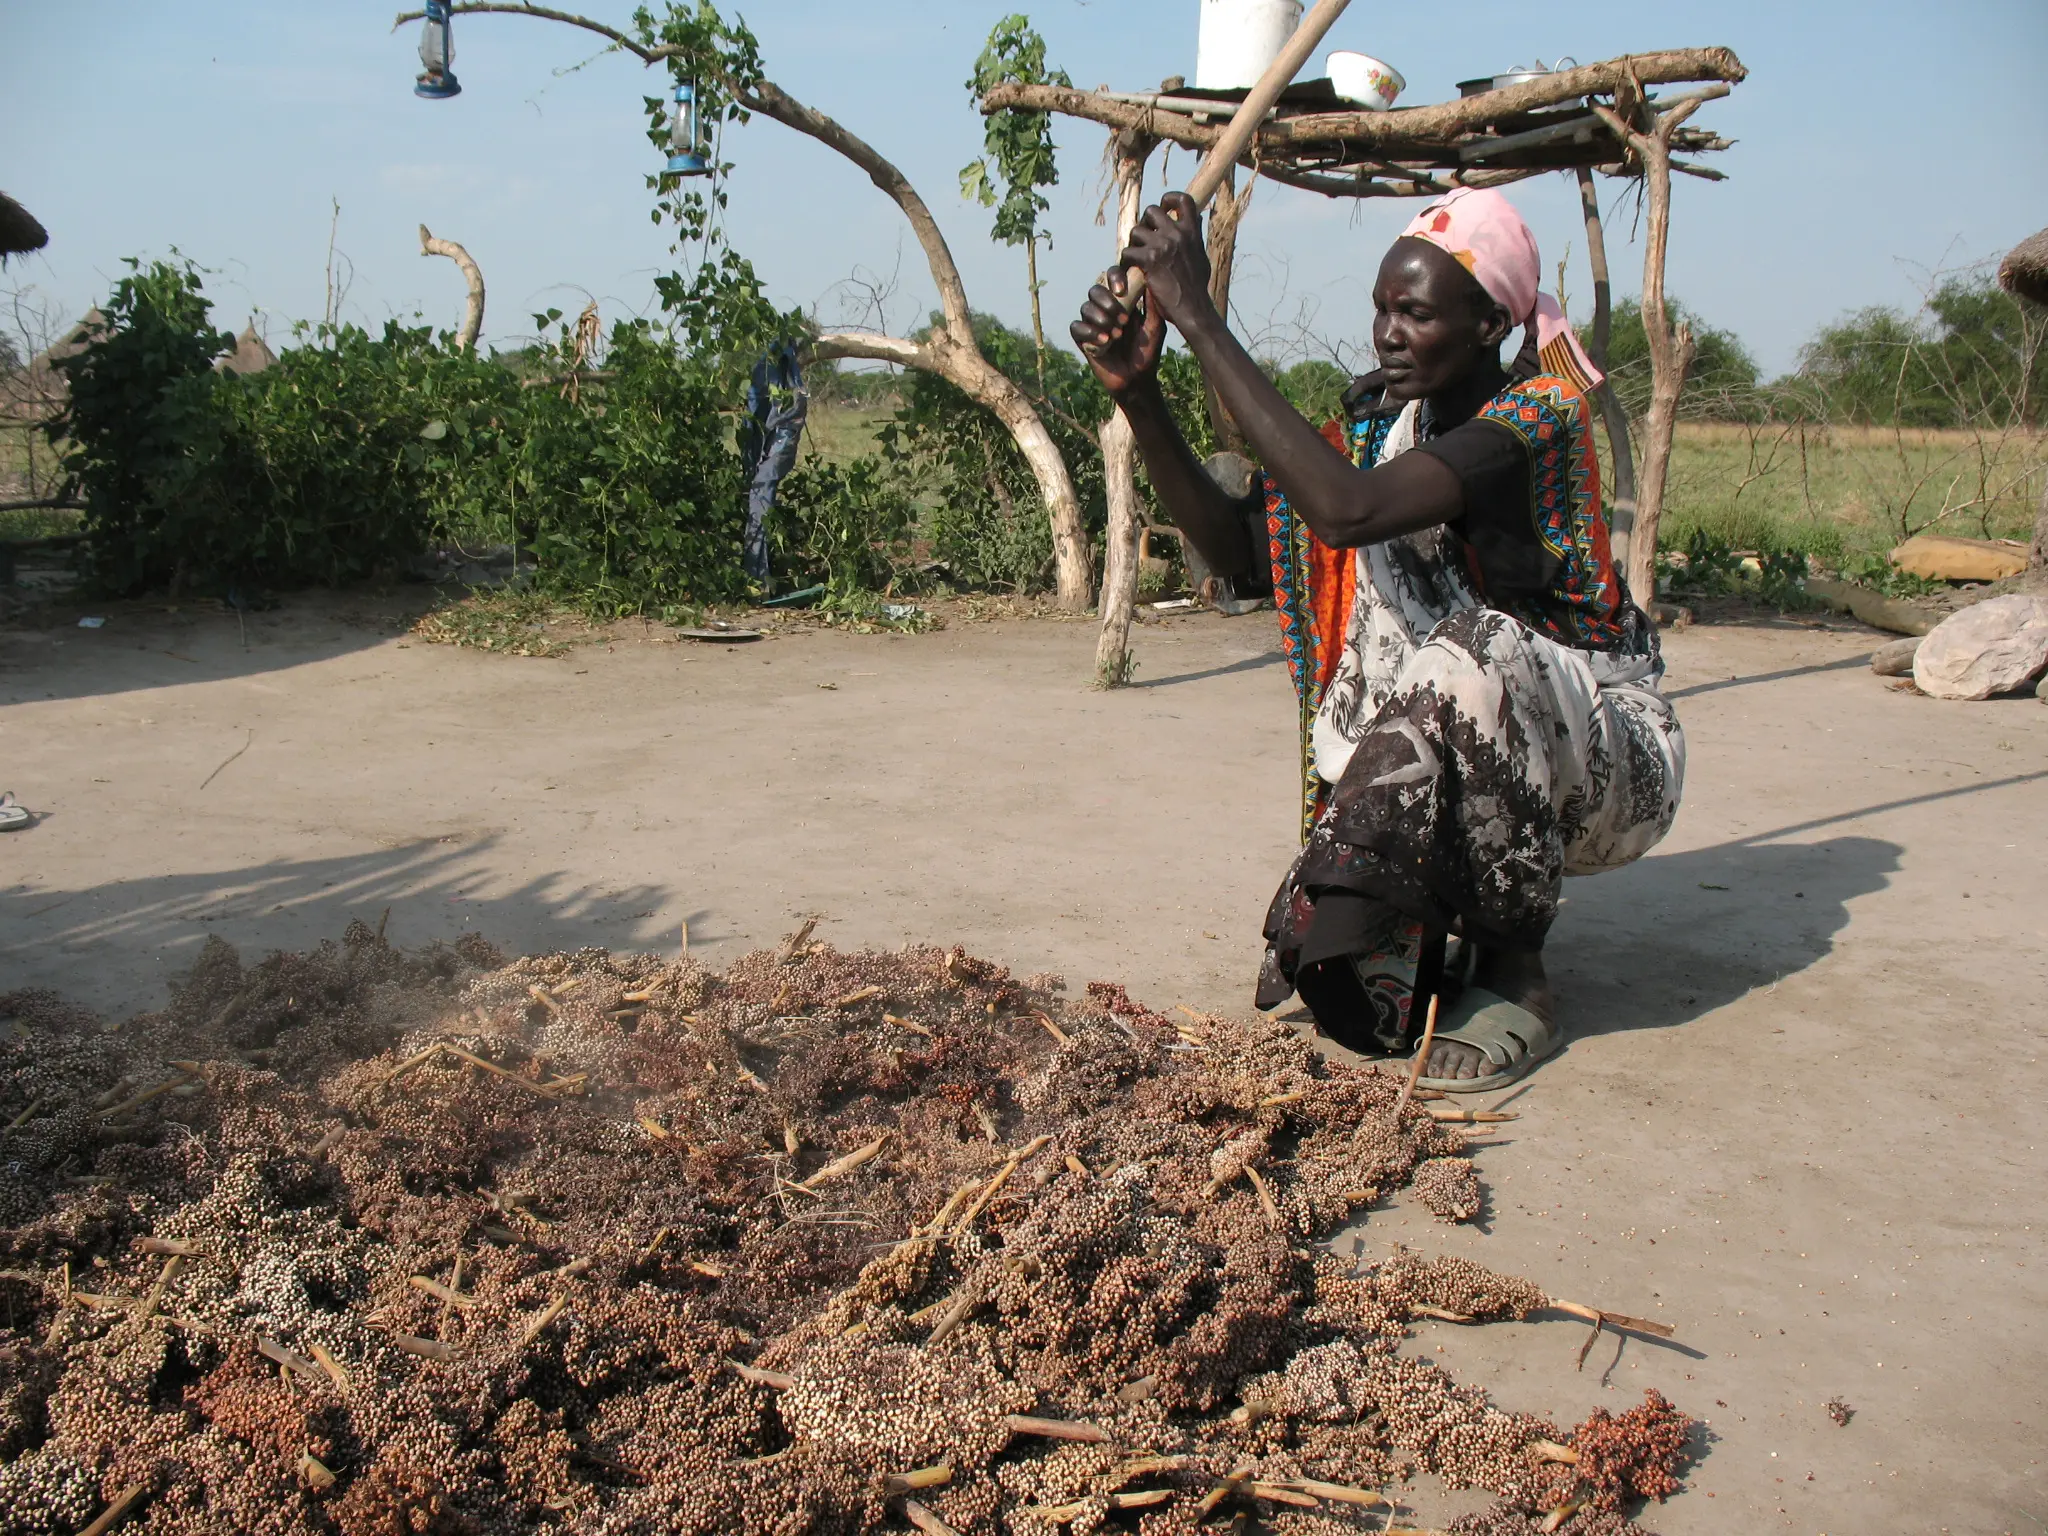 Dabora Nyibol, a returned refugee in South Sudan, prepares sorghum, a staple in her country. Photo by Stephen H. Padre/Bread for the World.